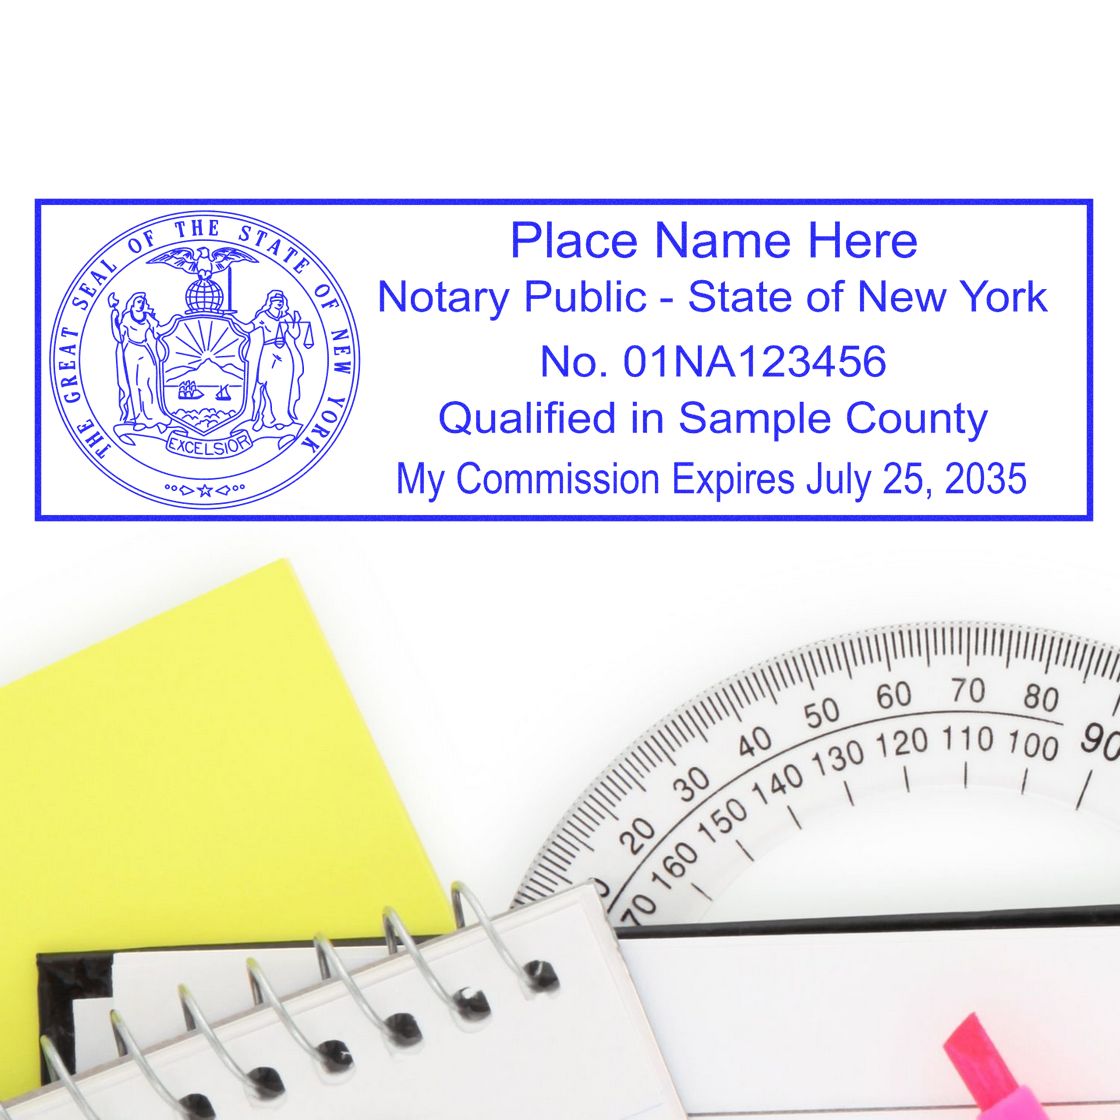 This paper is stamped with a sample imprint of the Wooden Handle New York State Seal Notary Public Stamp, signifying its quality and reliability.